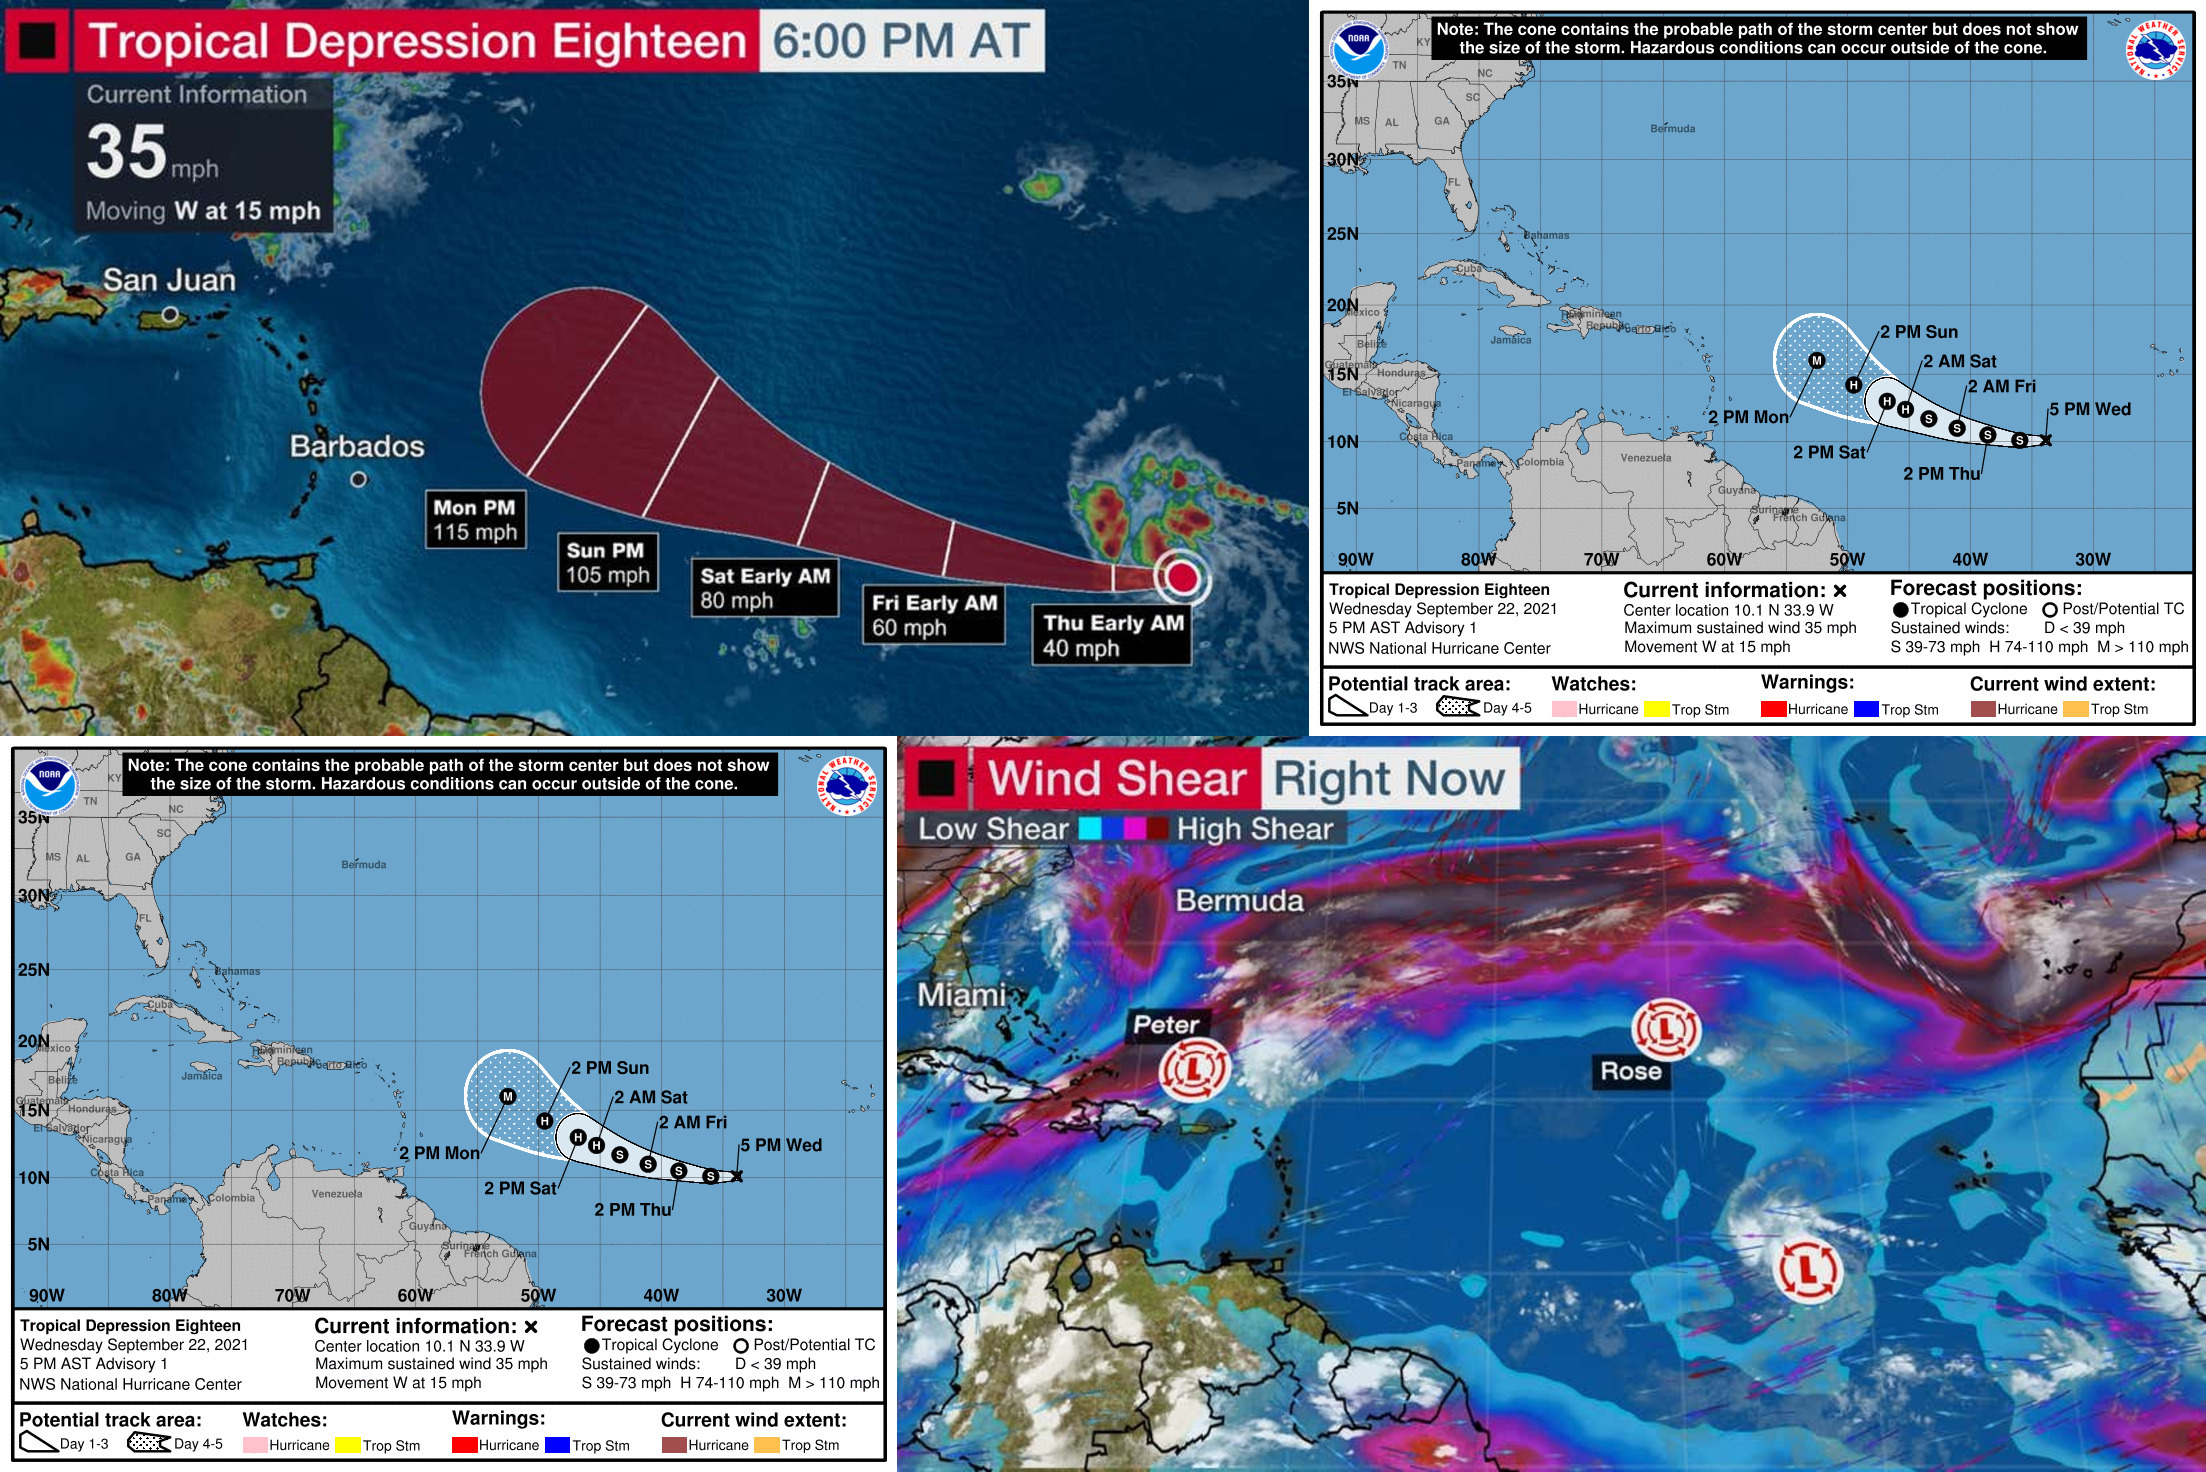 Tropical Depression Eighteen Forecast To Become Hurricane Sam This Weekend